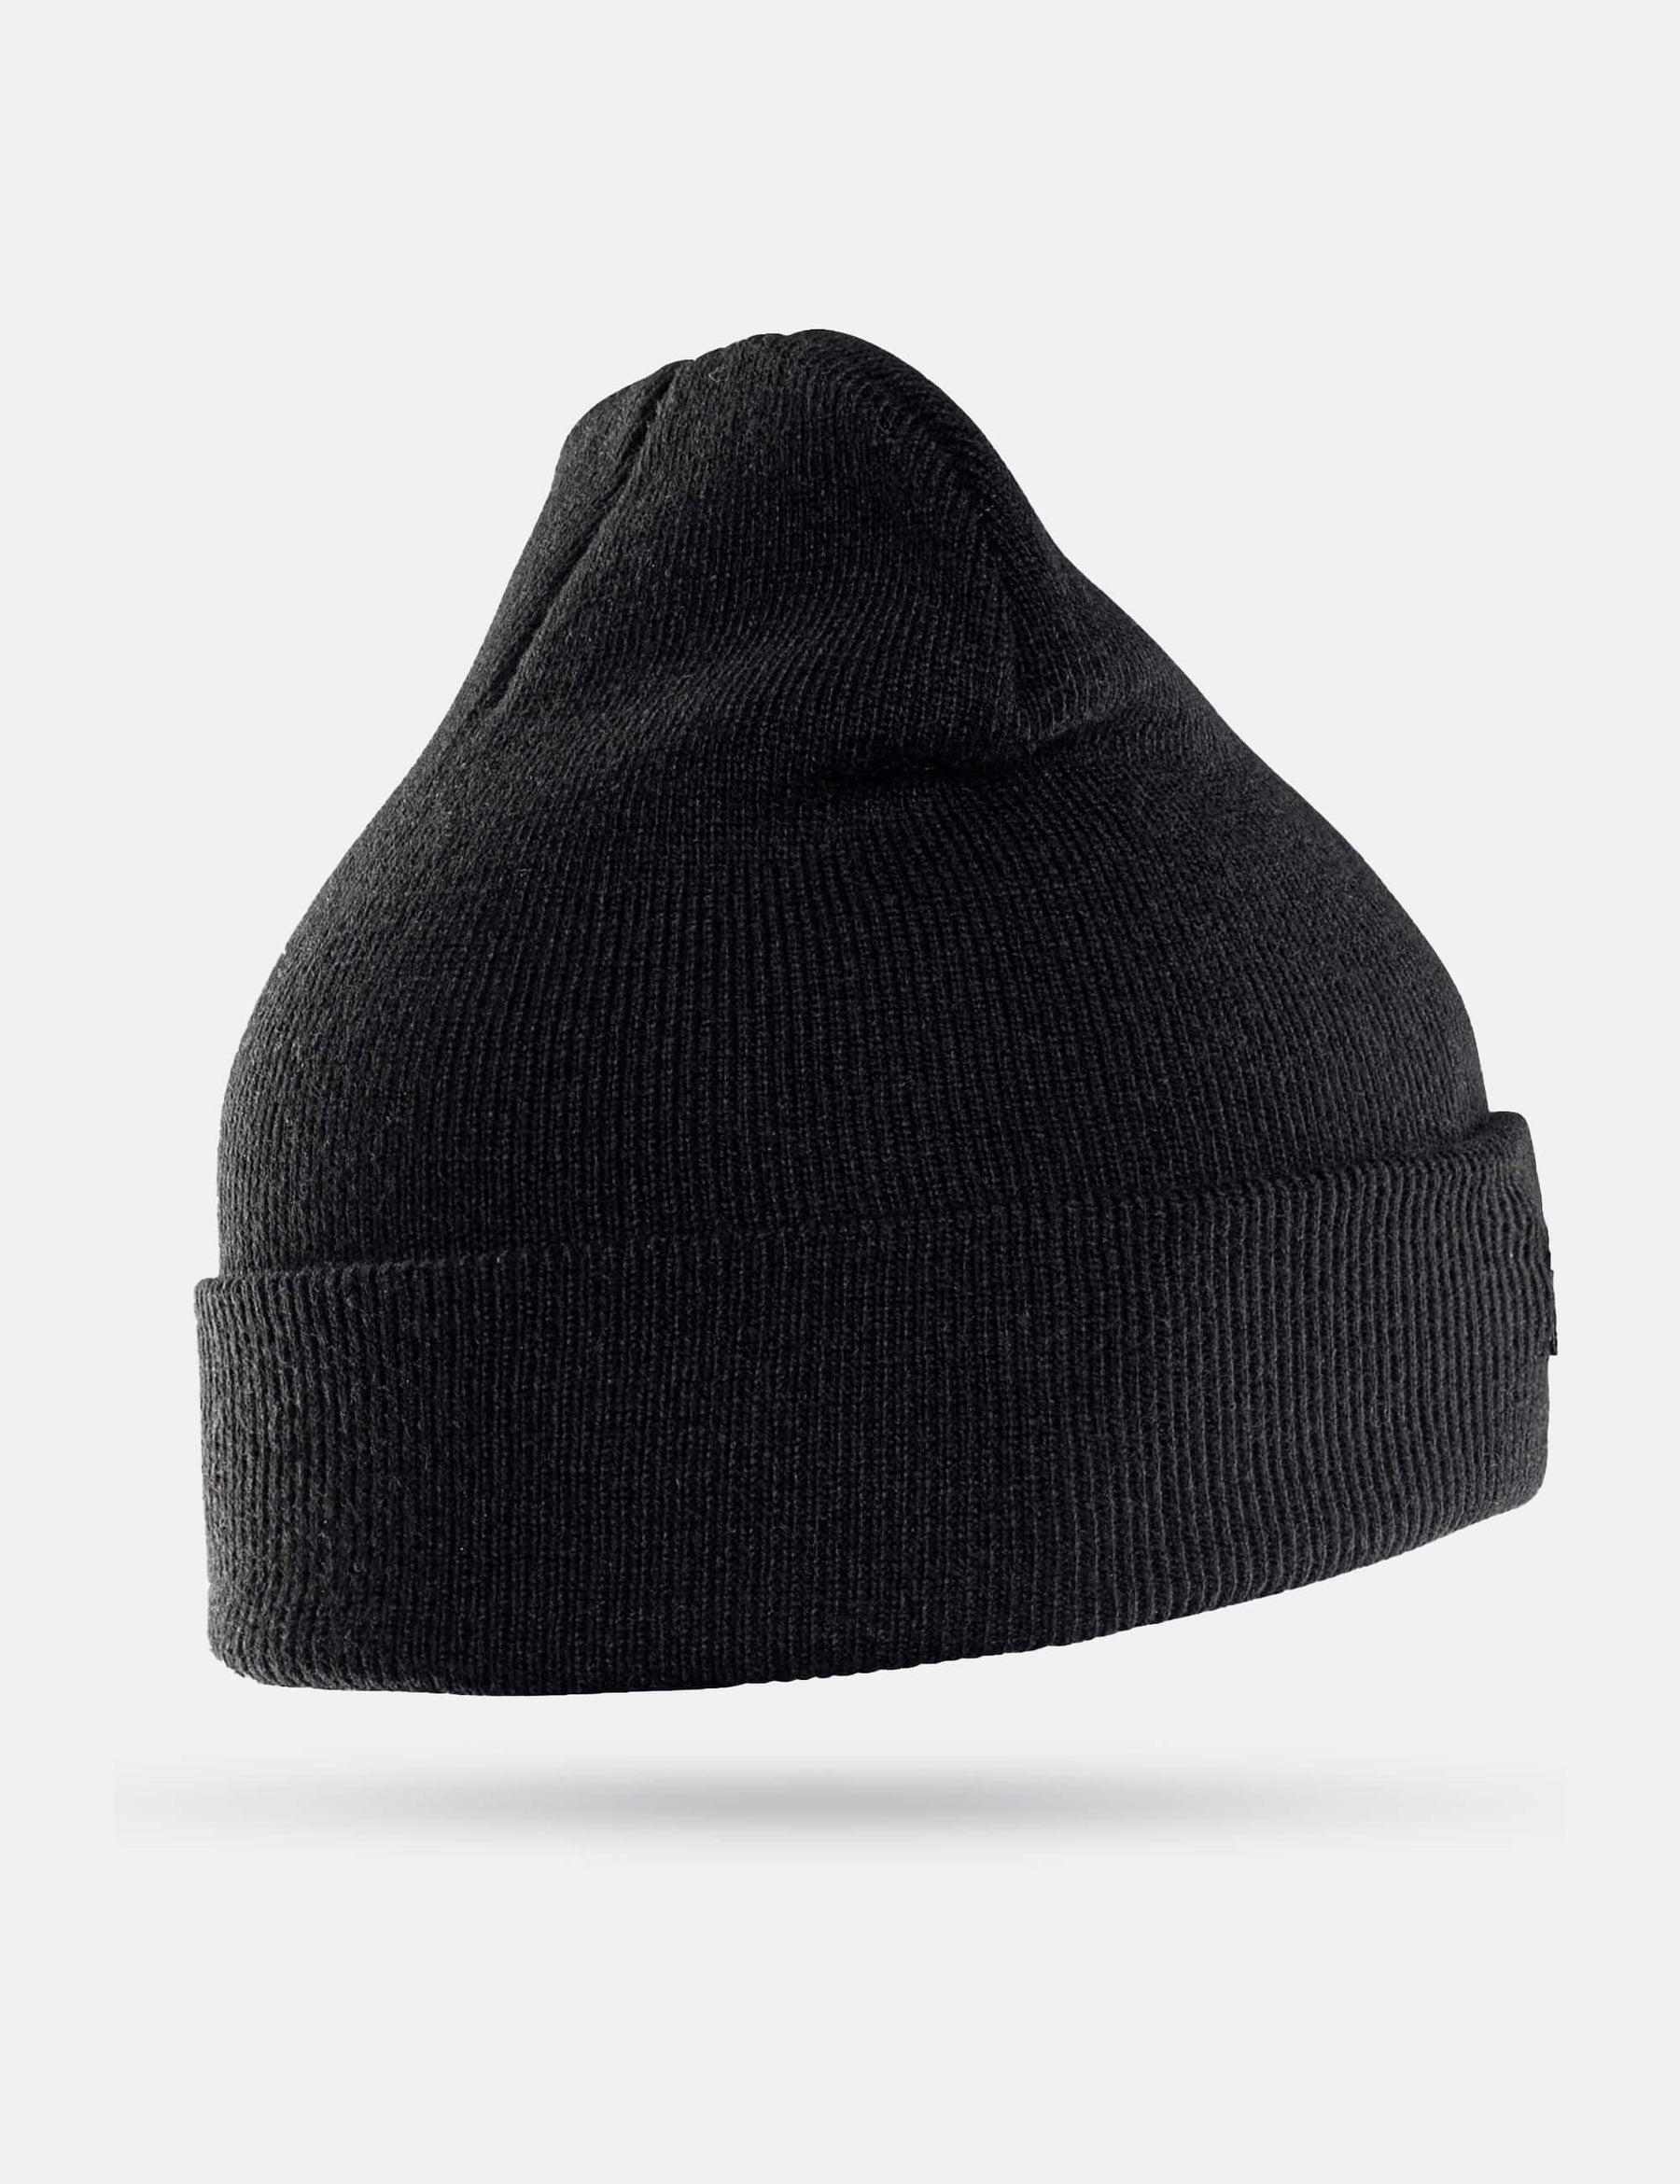 Side view of the GORNATION black beanie.